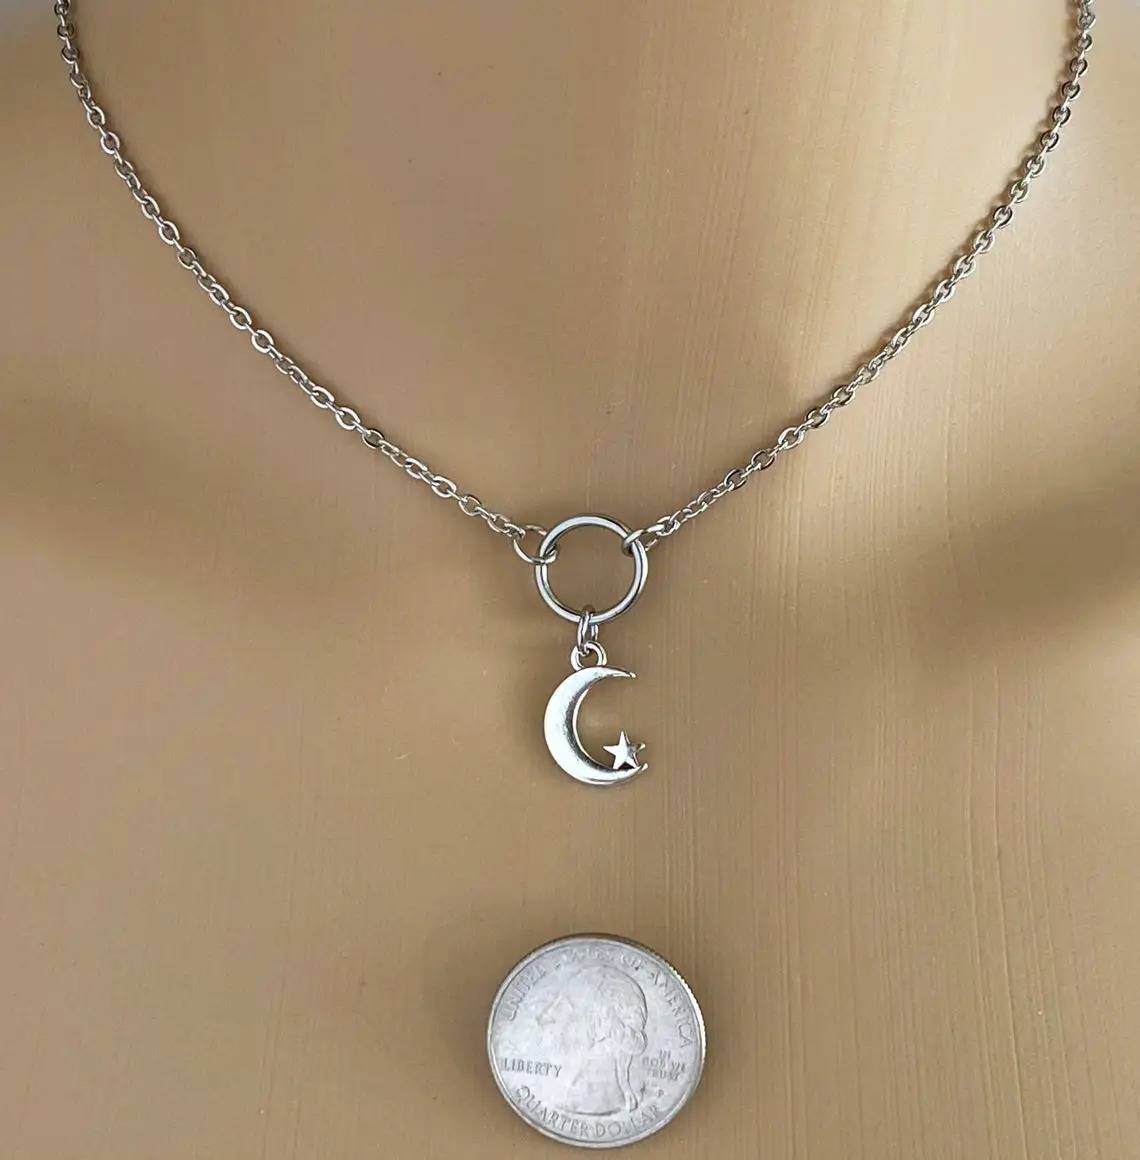 Submissive Necklace Moon and Star - Celtic Knot-Discreet Day Collar pic picture picture